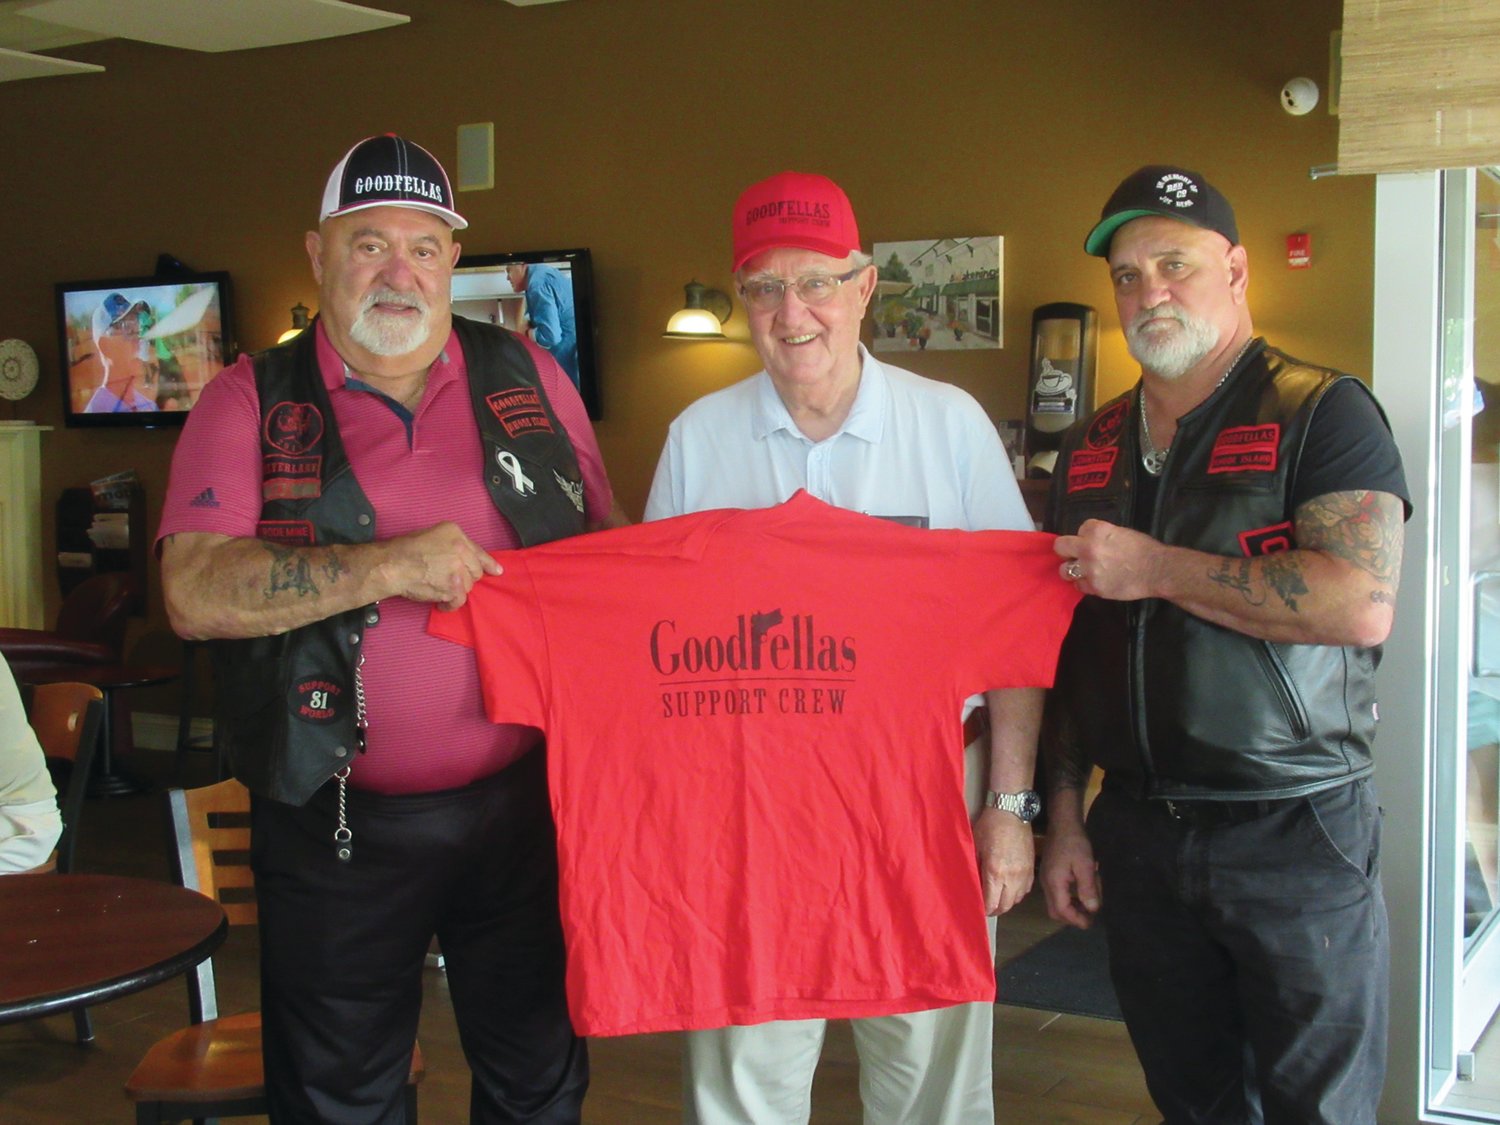 GENEROUS GUY:  Last year, Bruno Ramieri, center, held a special T-shirt he received from Goodfellas Motorcycle Club treasurer Cal Calabro, left, and president Gene Benedetti as thanks for his pledge to match up to $20,000 raised through the fifth annual Goodfellas Motorcycle Run. Ramieri has offered to do the same for this year’s run.